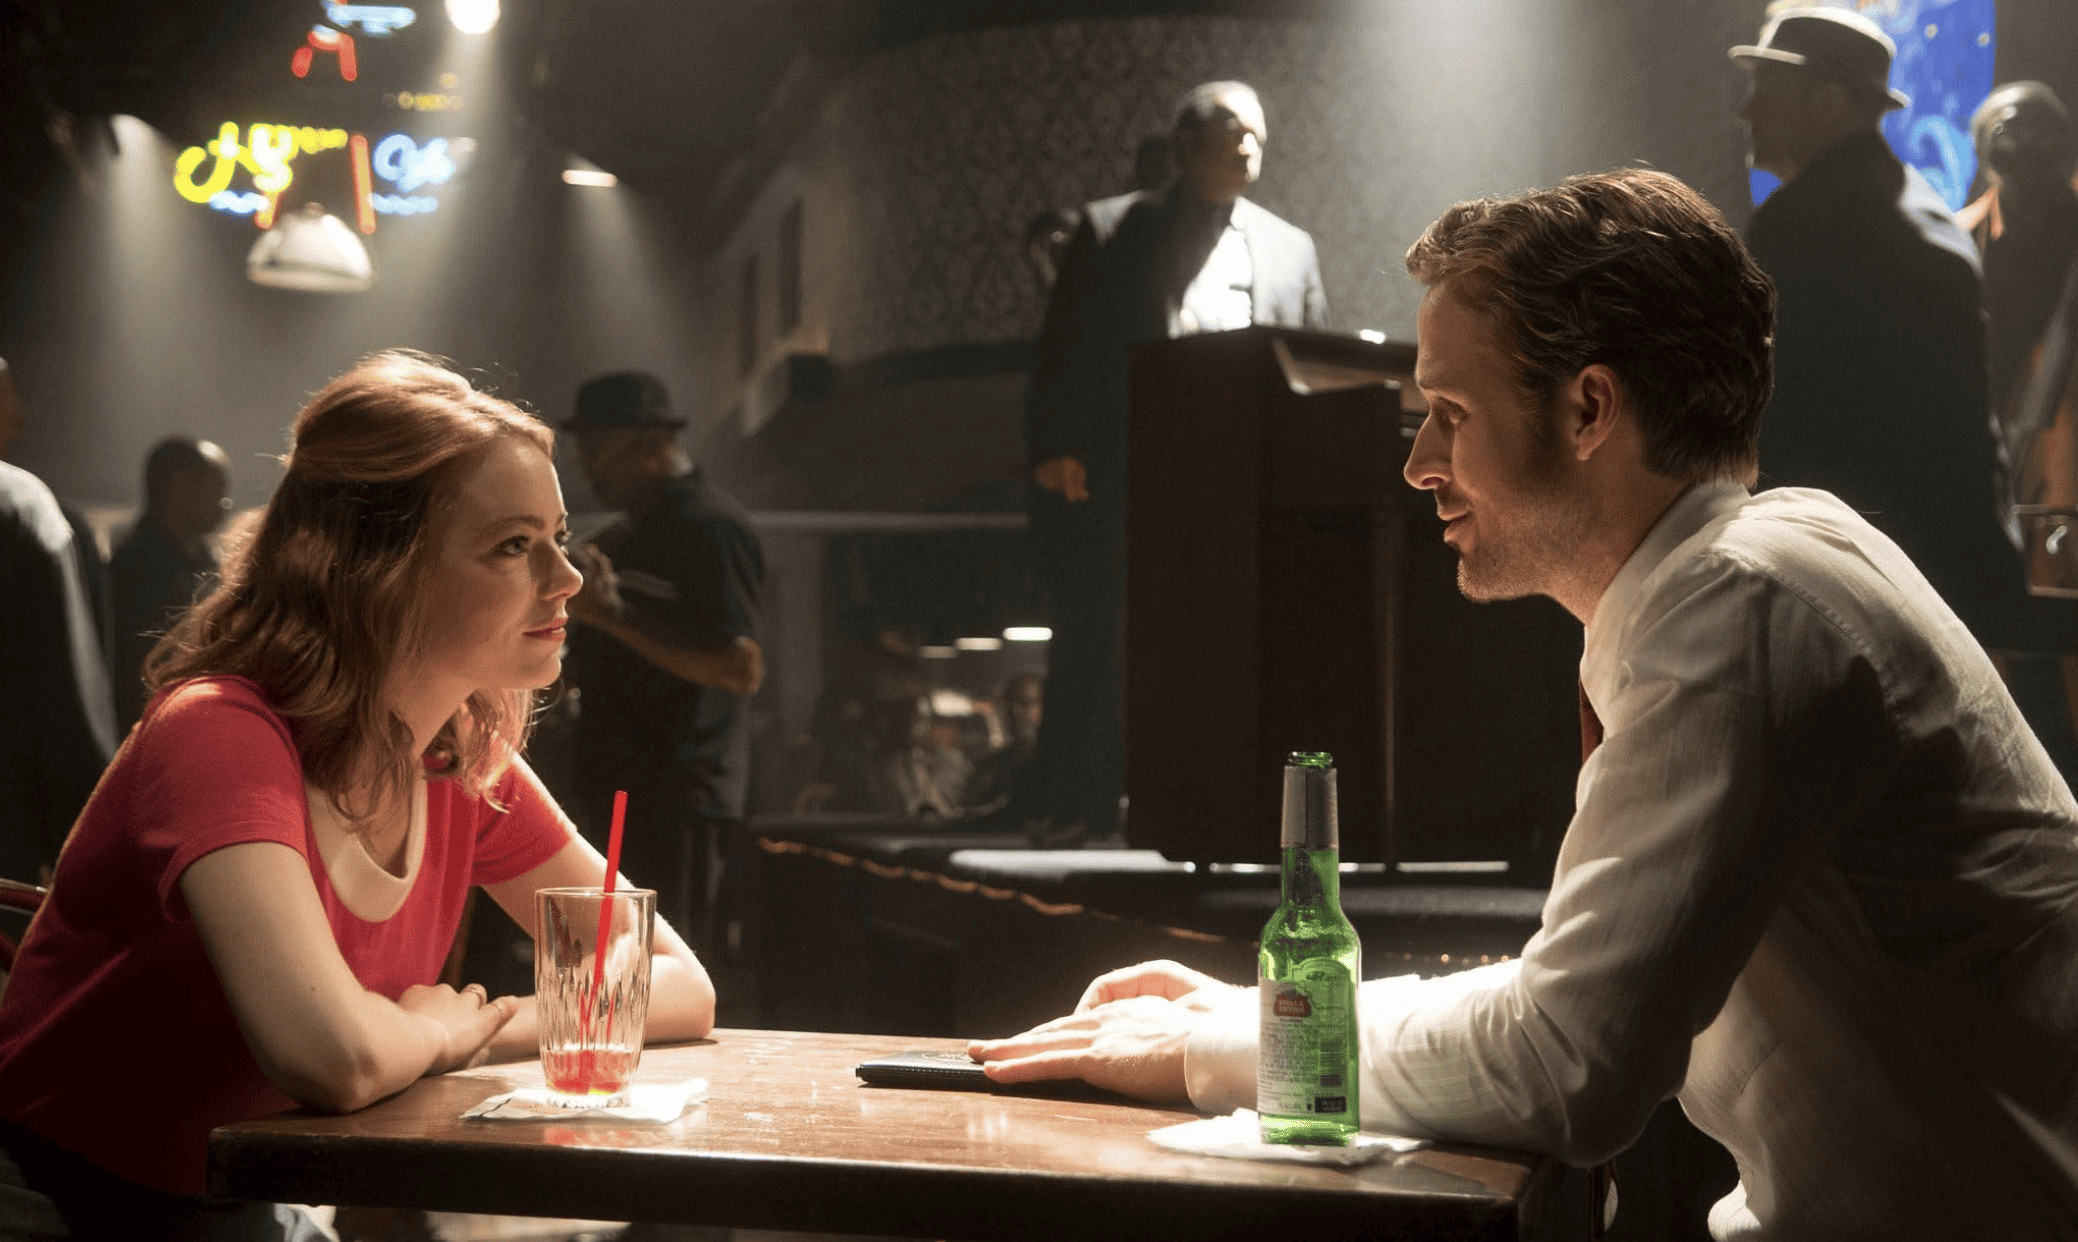 A couple enjoys drinks together in a jazz bar in this image from Summit Entertainment